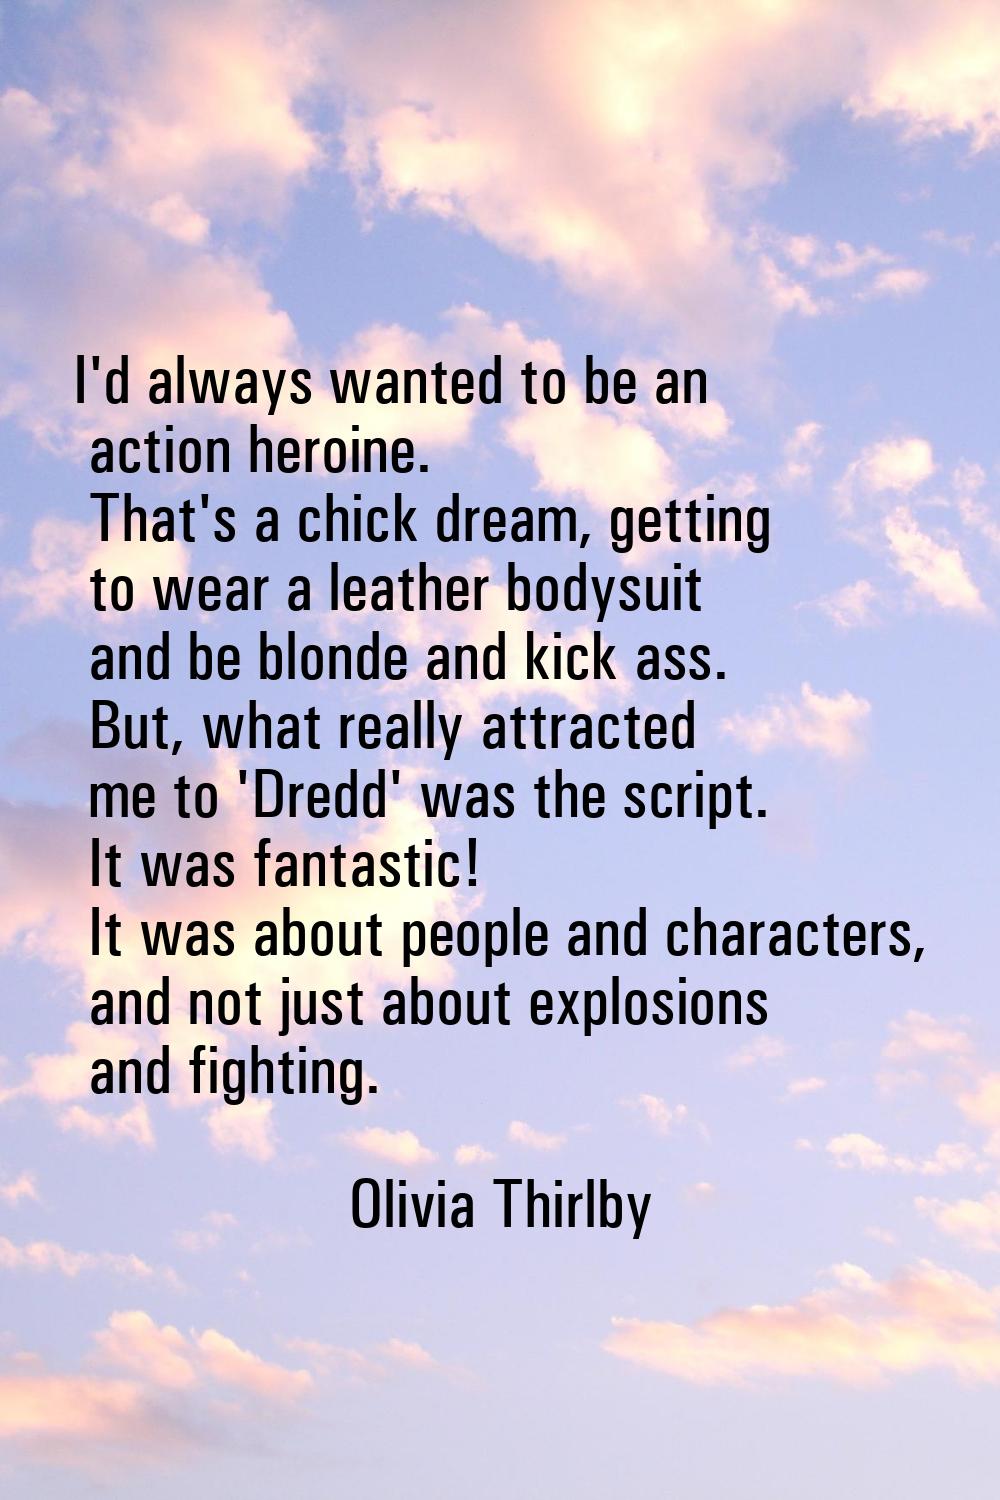 I'd always wanted to be an action heroine. That's a chick dream, getting to wear a leather bodysuit